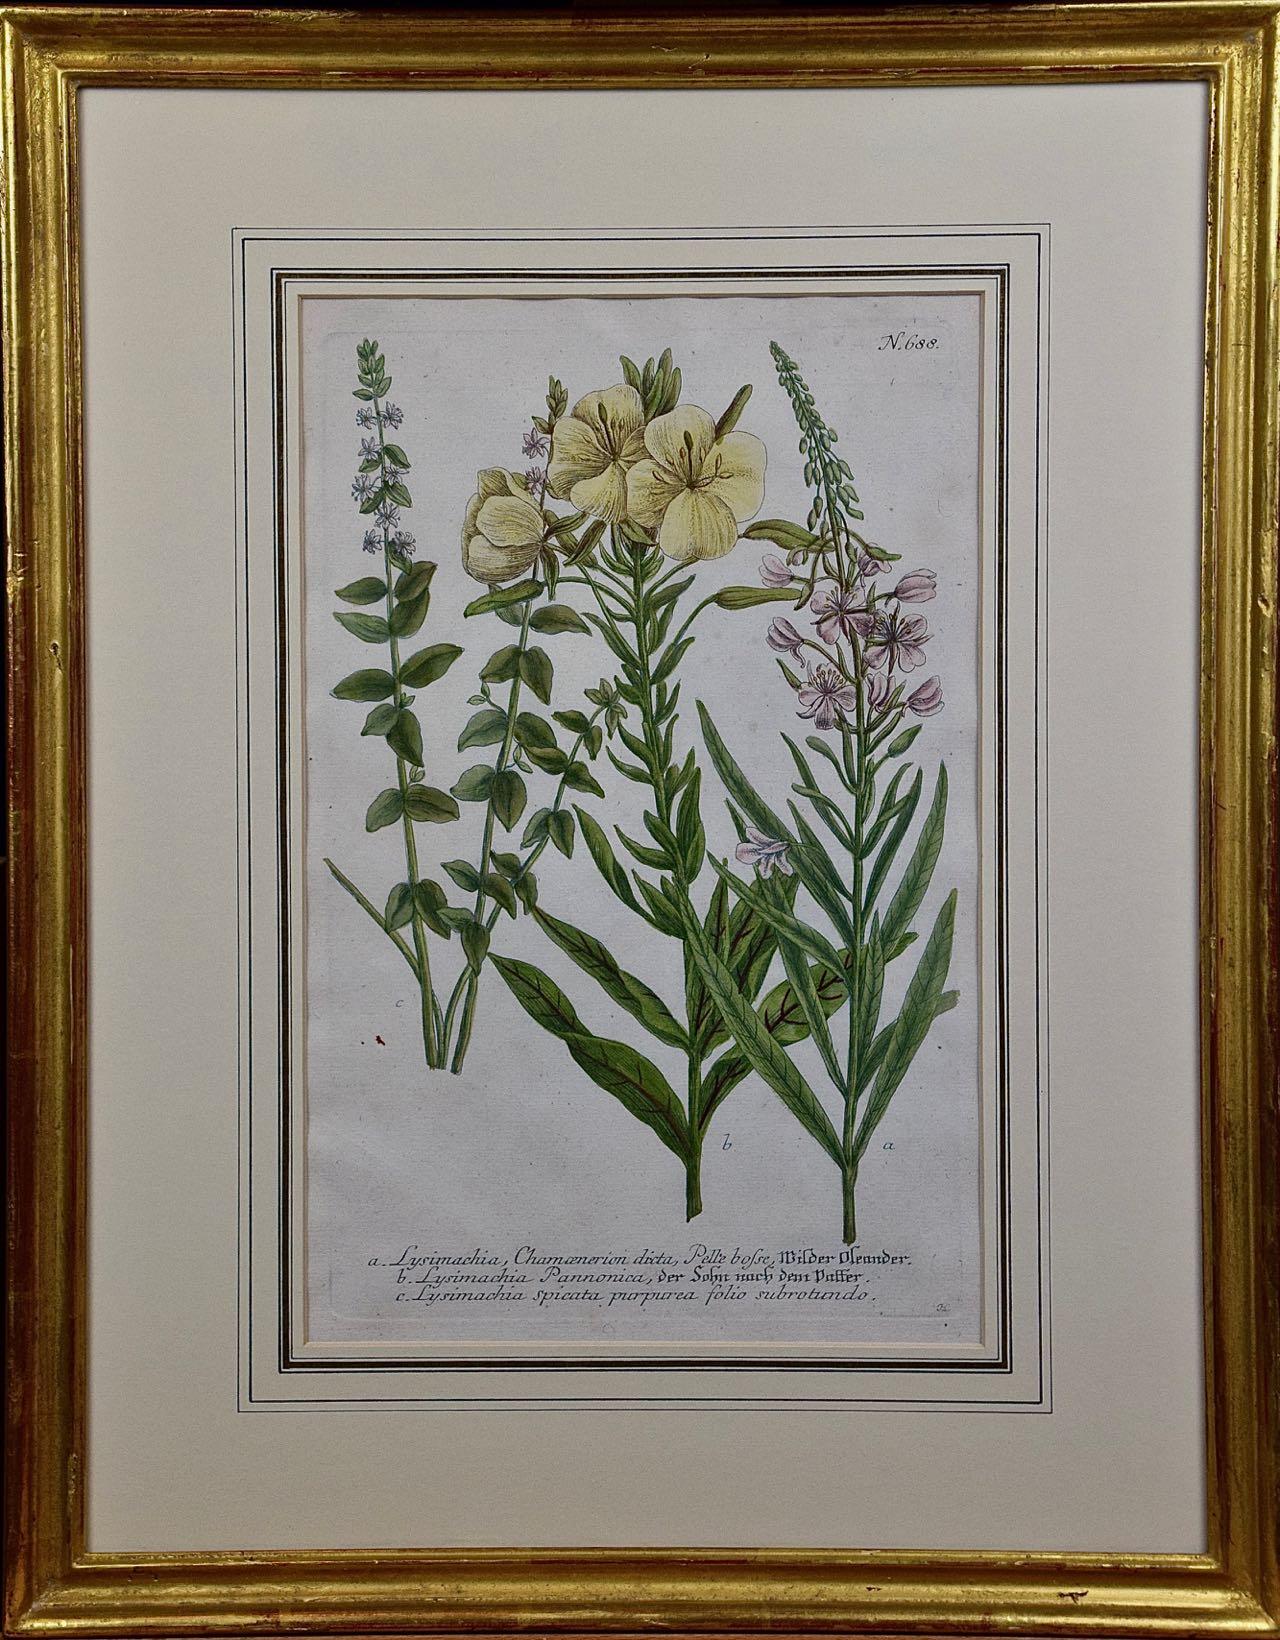 A Set of Four Framed 18th Century Hand Colored Botanical Engravings by Weinmann 1